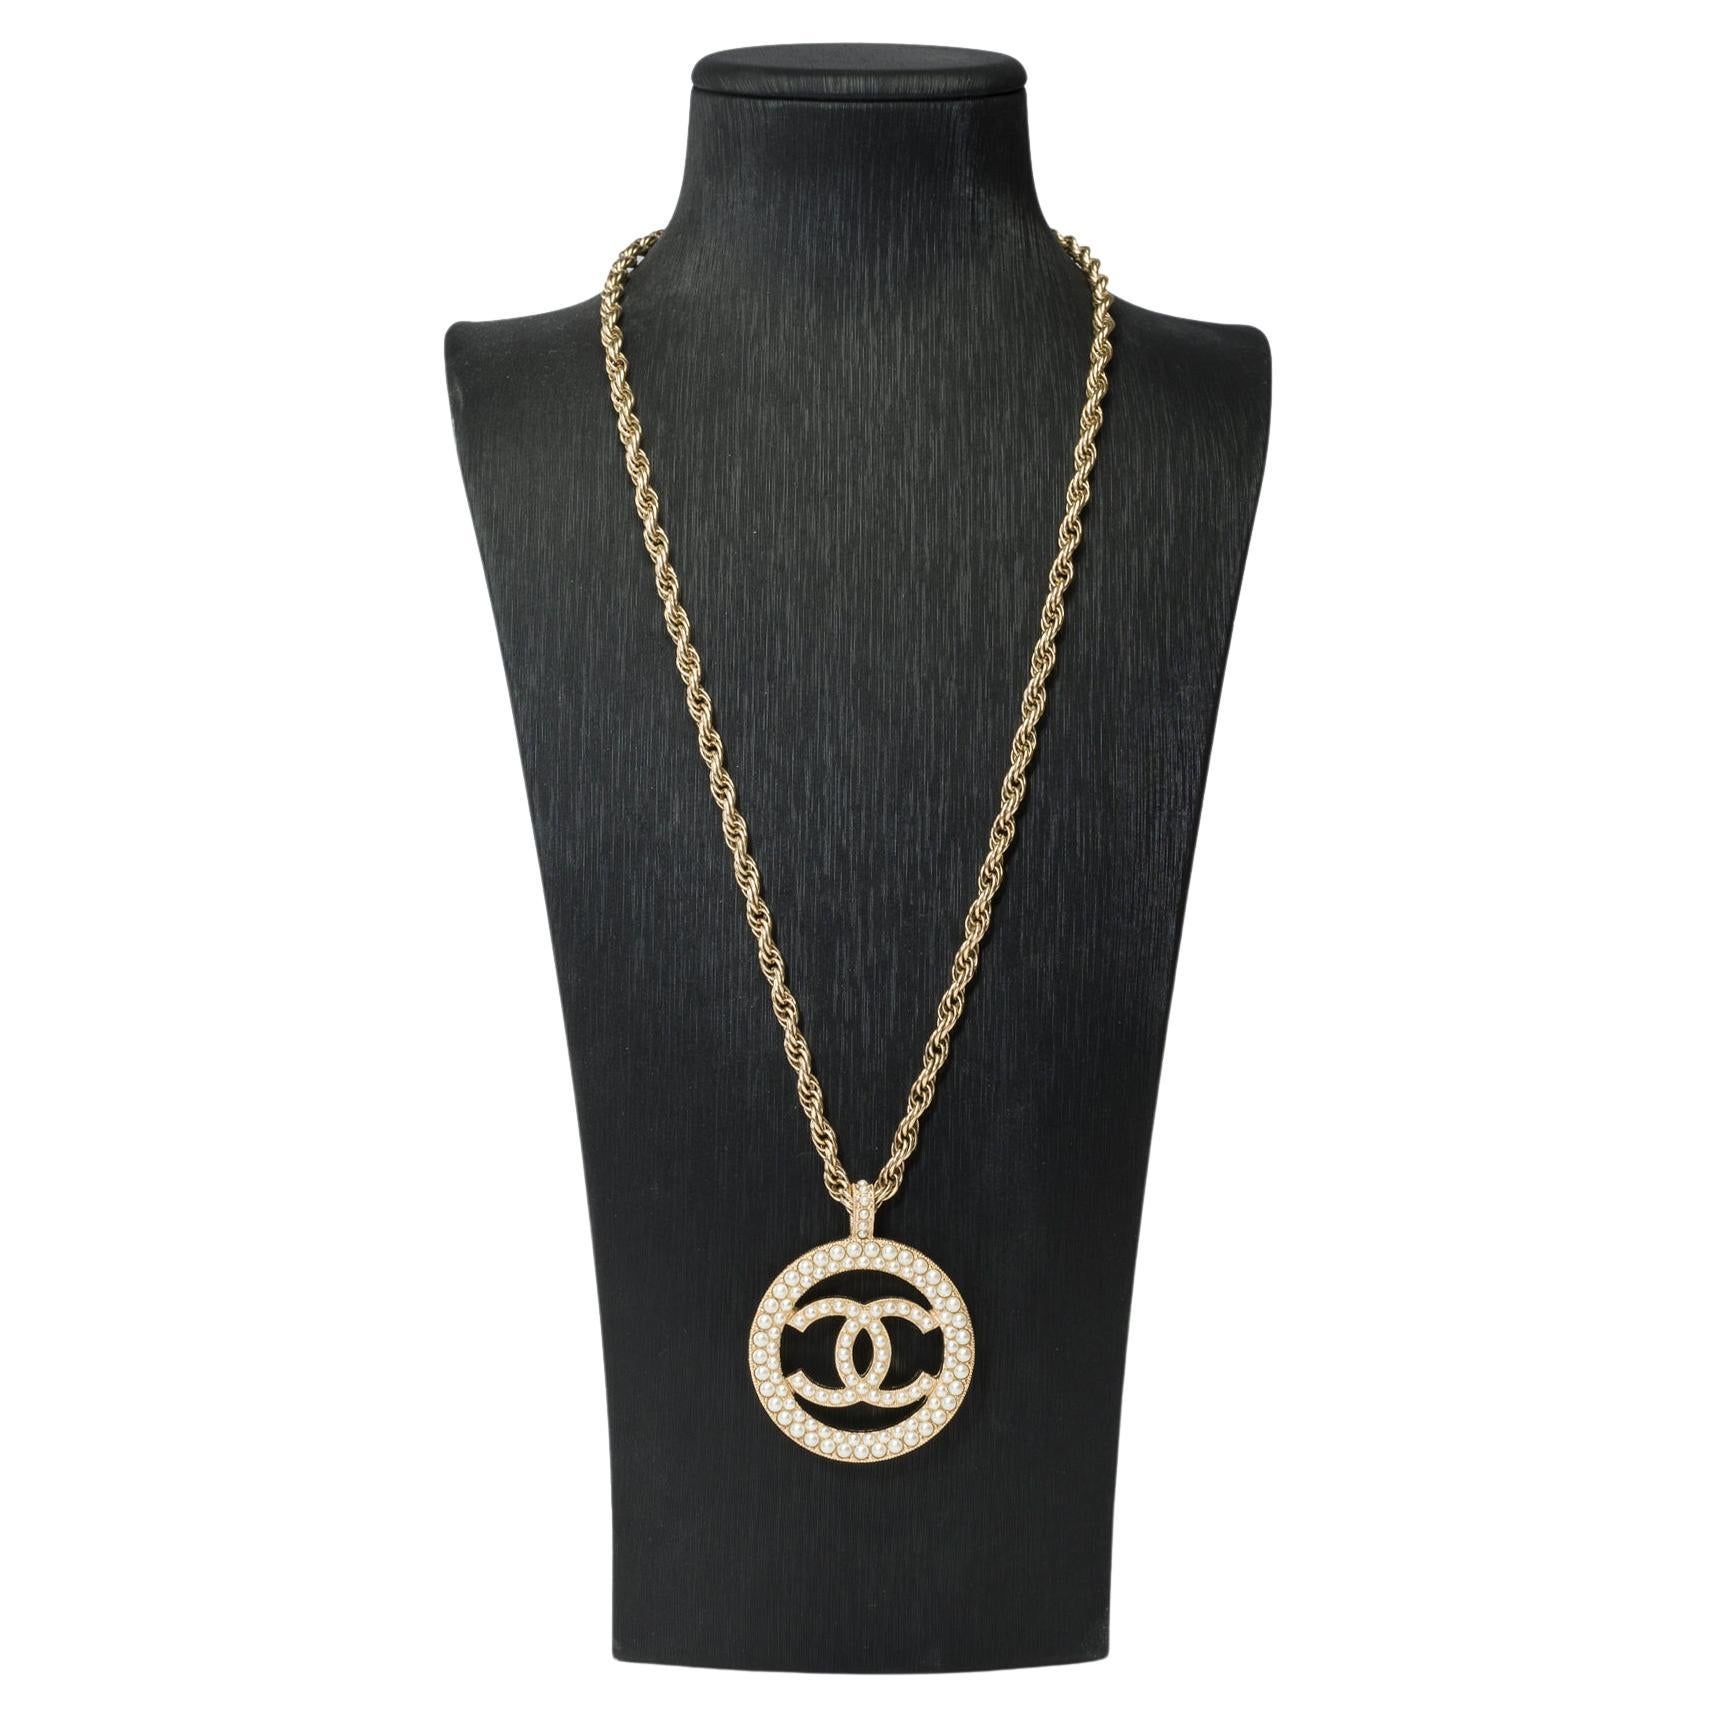  Chanel Necklace CC With Pearl and Gold color metal For Sale